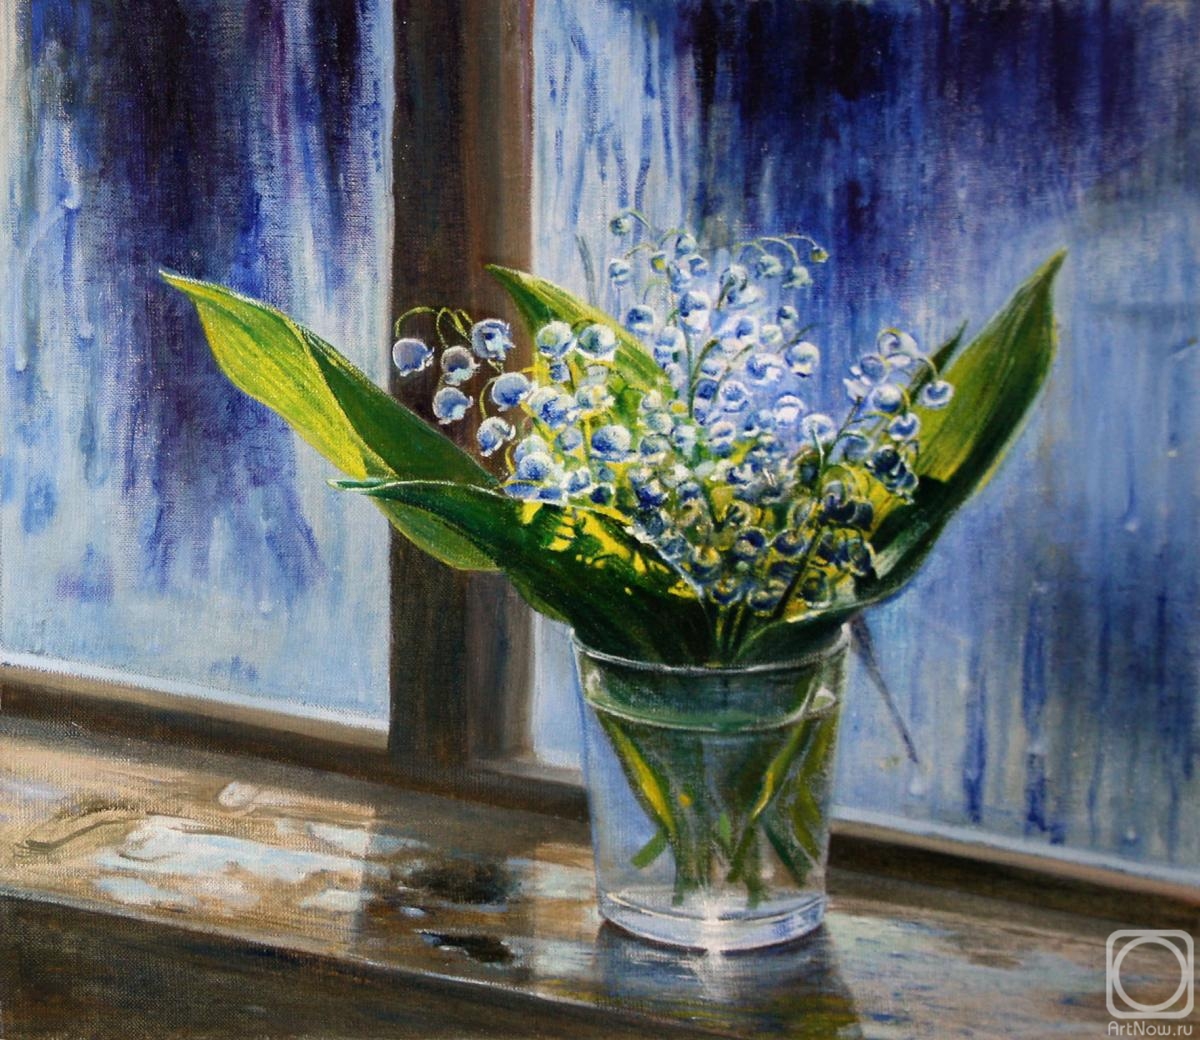 Kudryashov Galina. Lilies of the valley and the rain outside the window